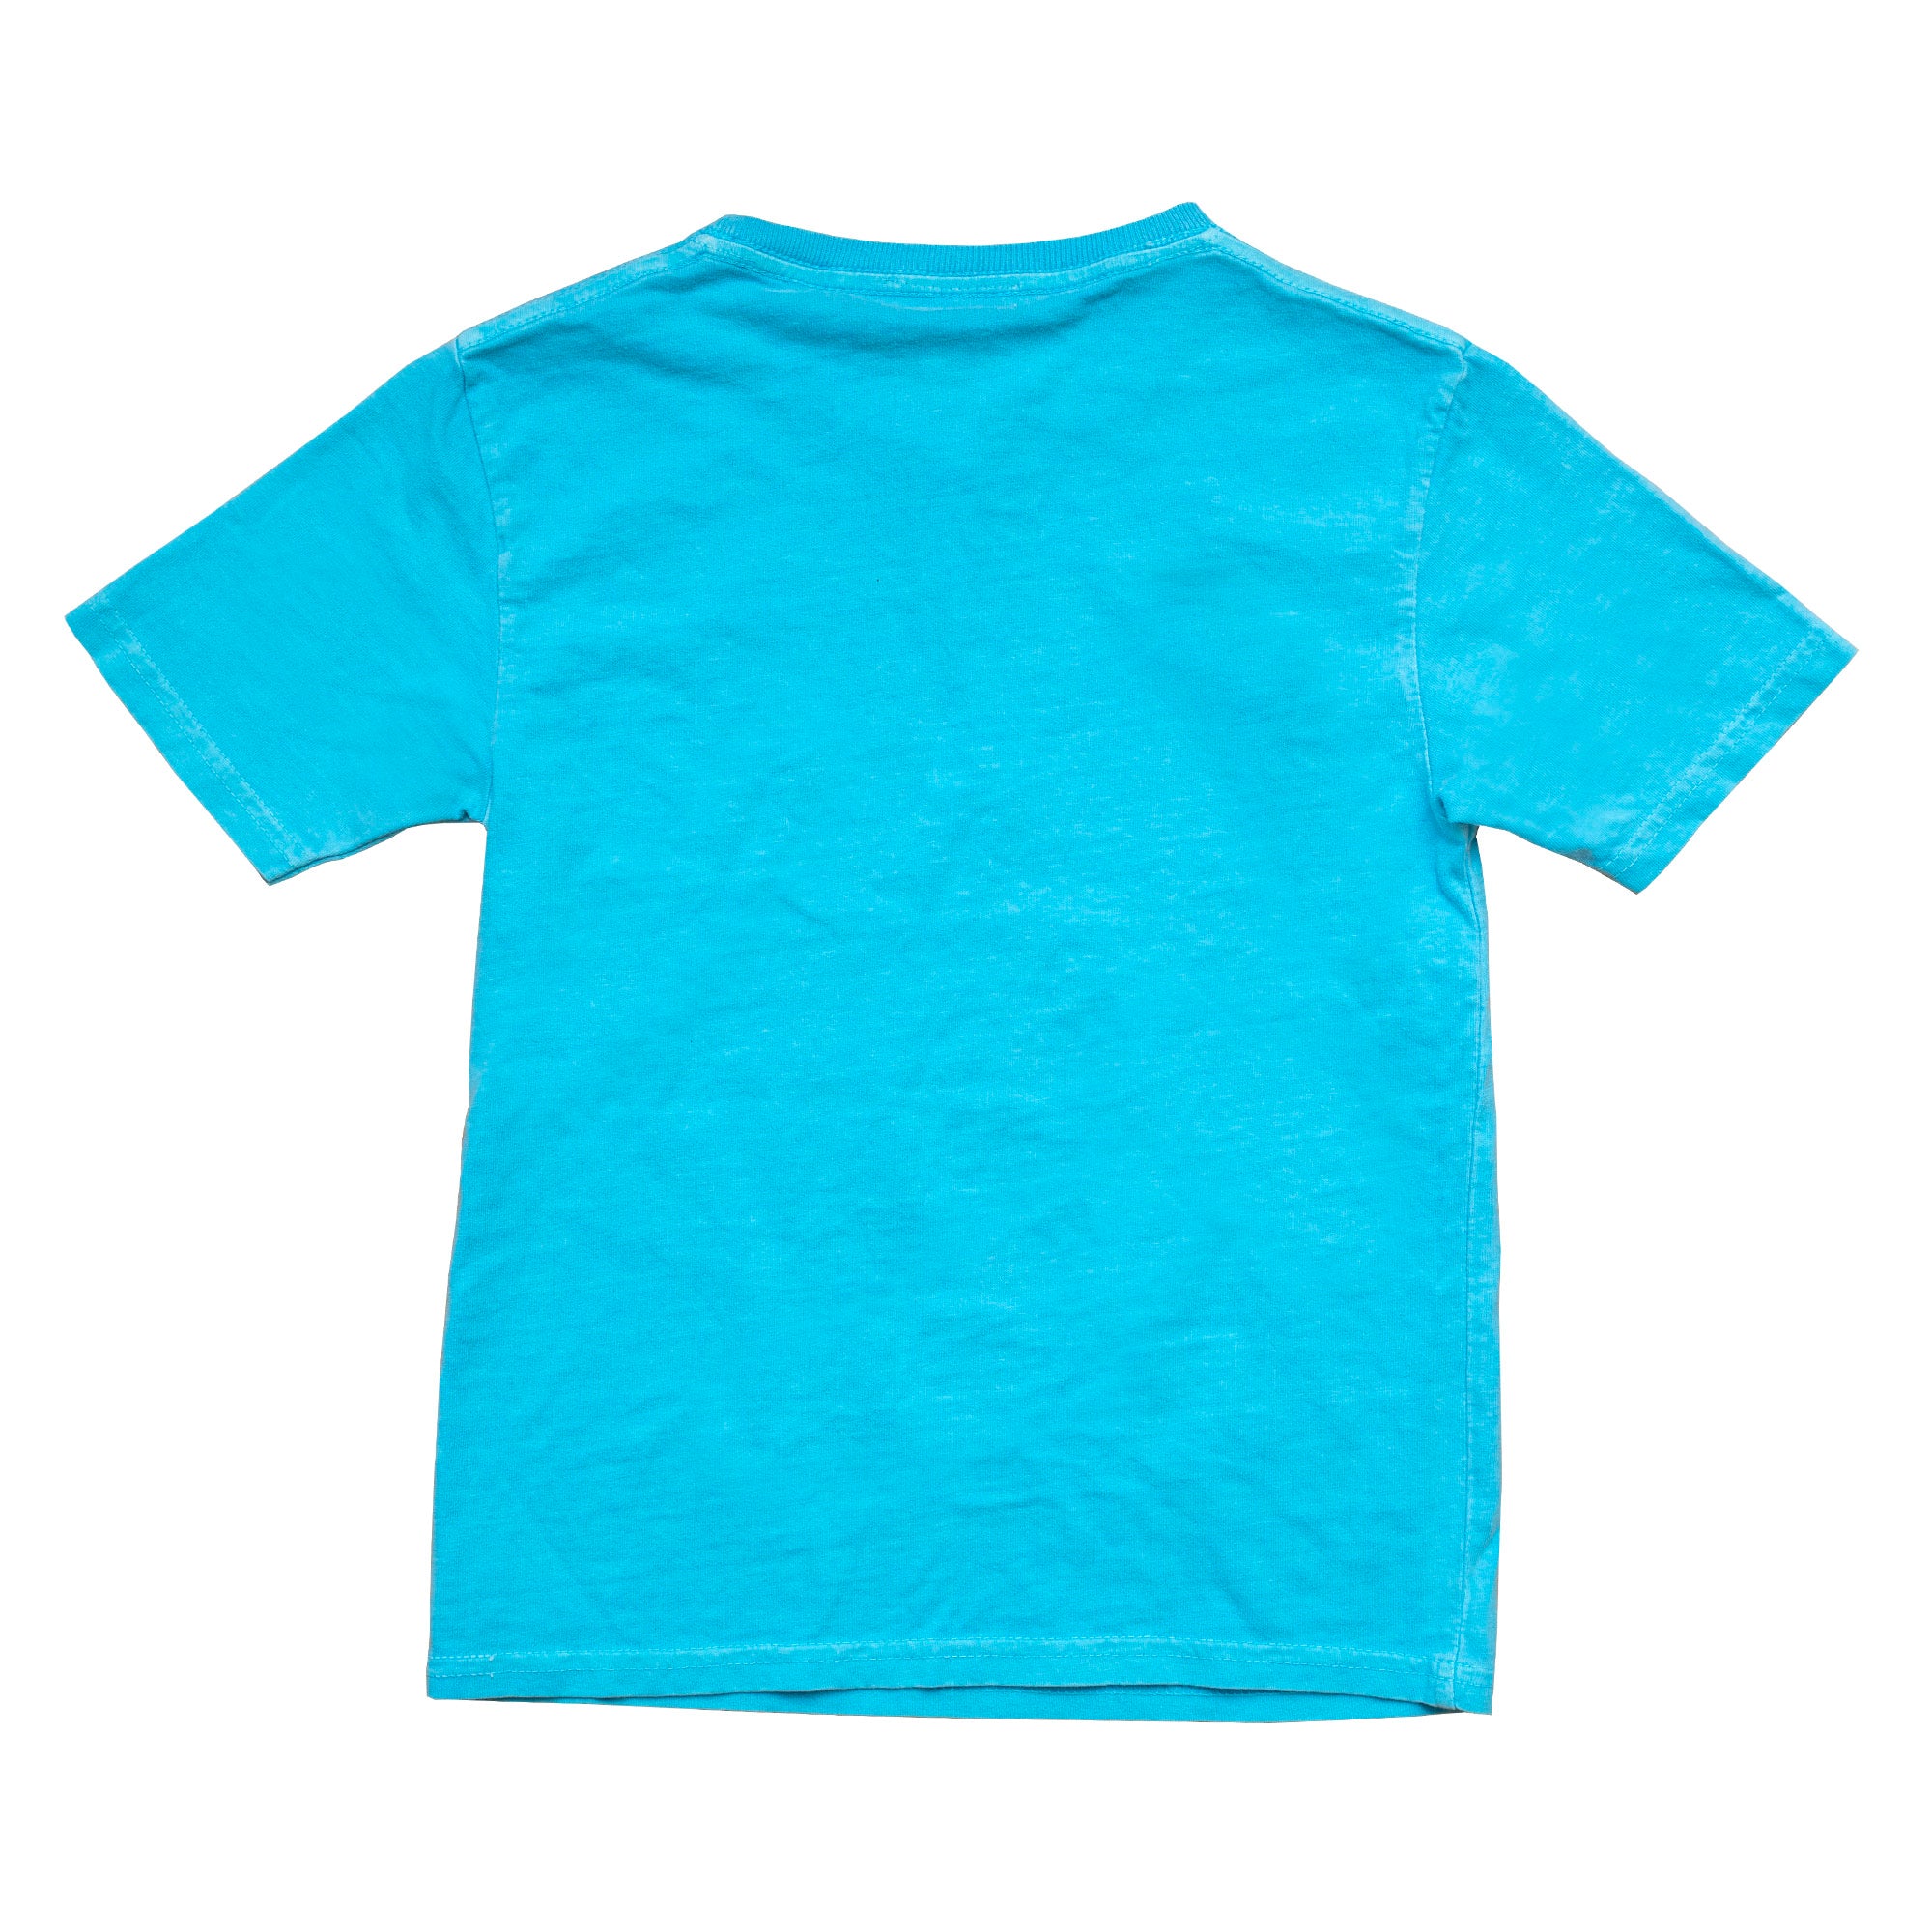 Surf Station Big Wave Youth Girl's S/S T-Shirt